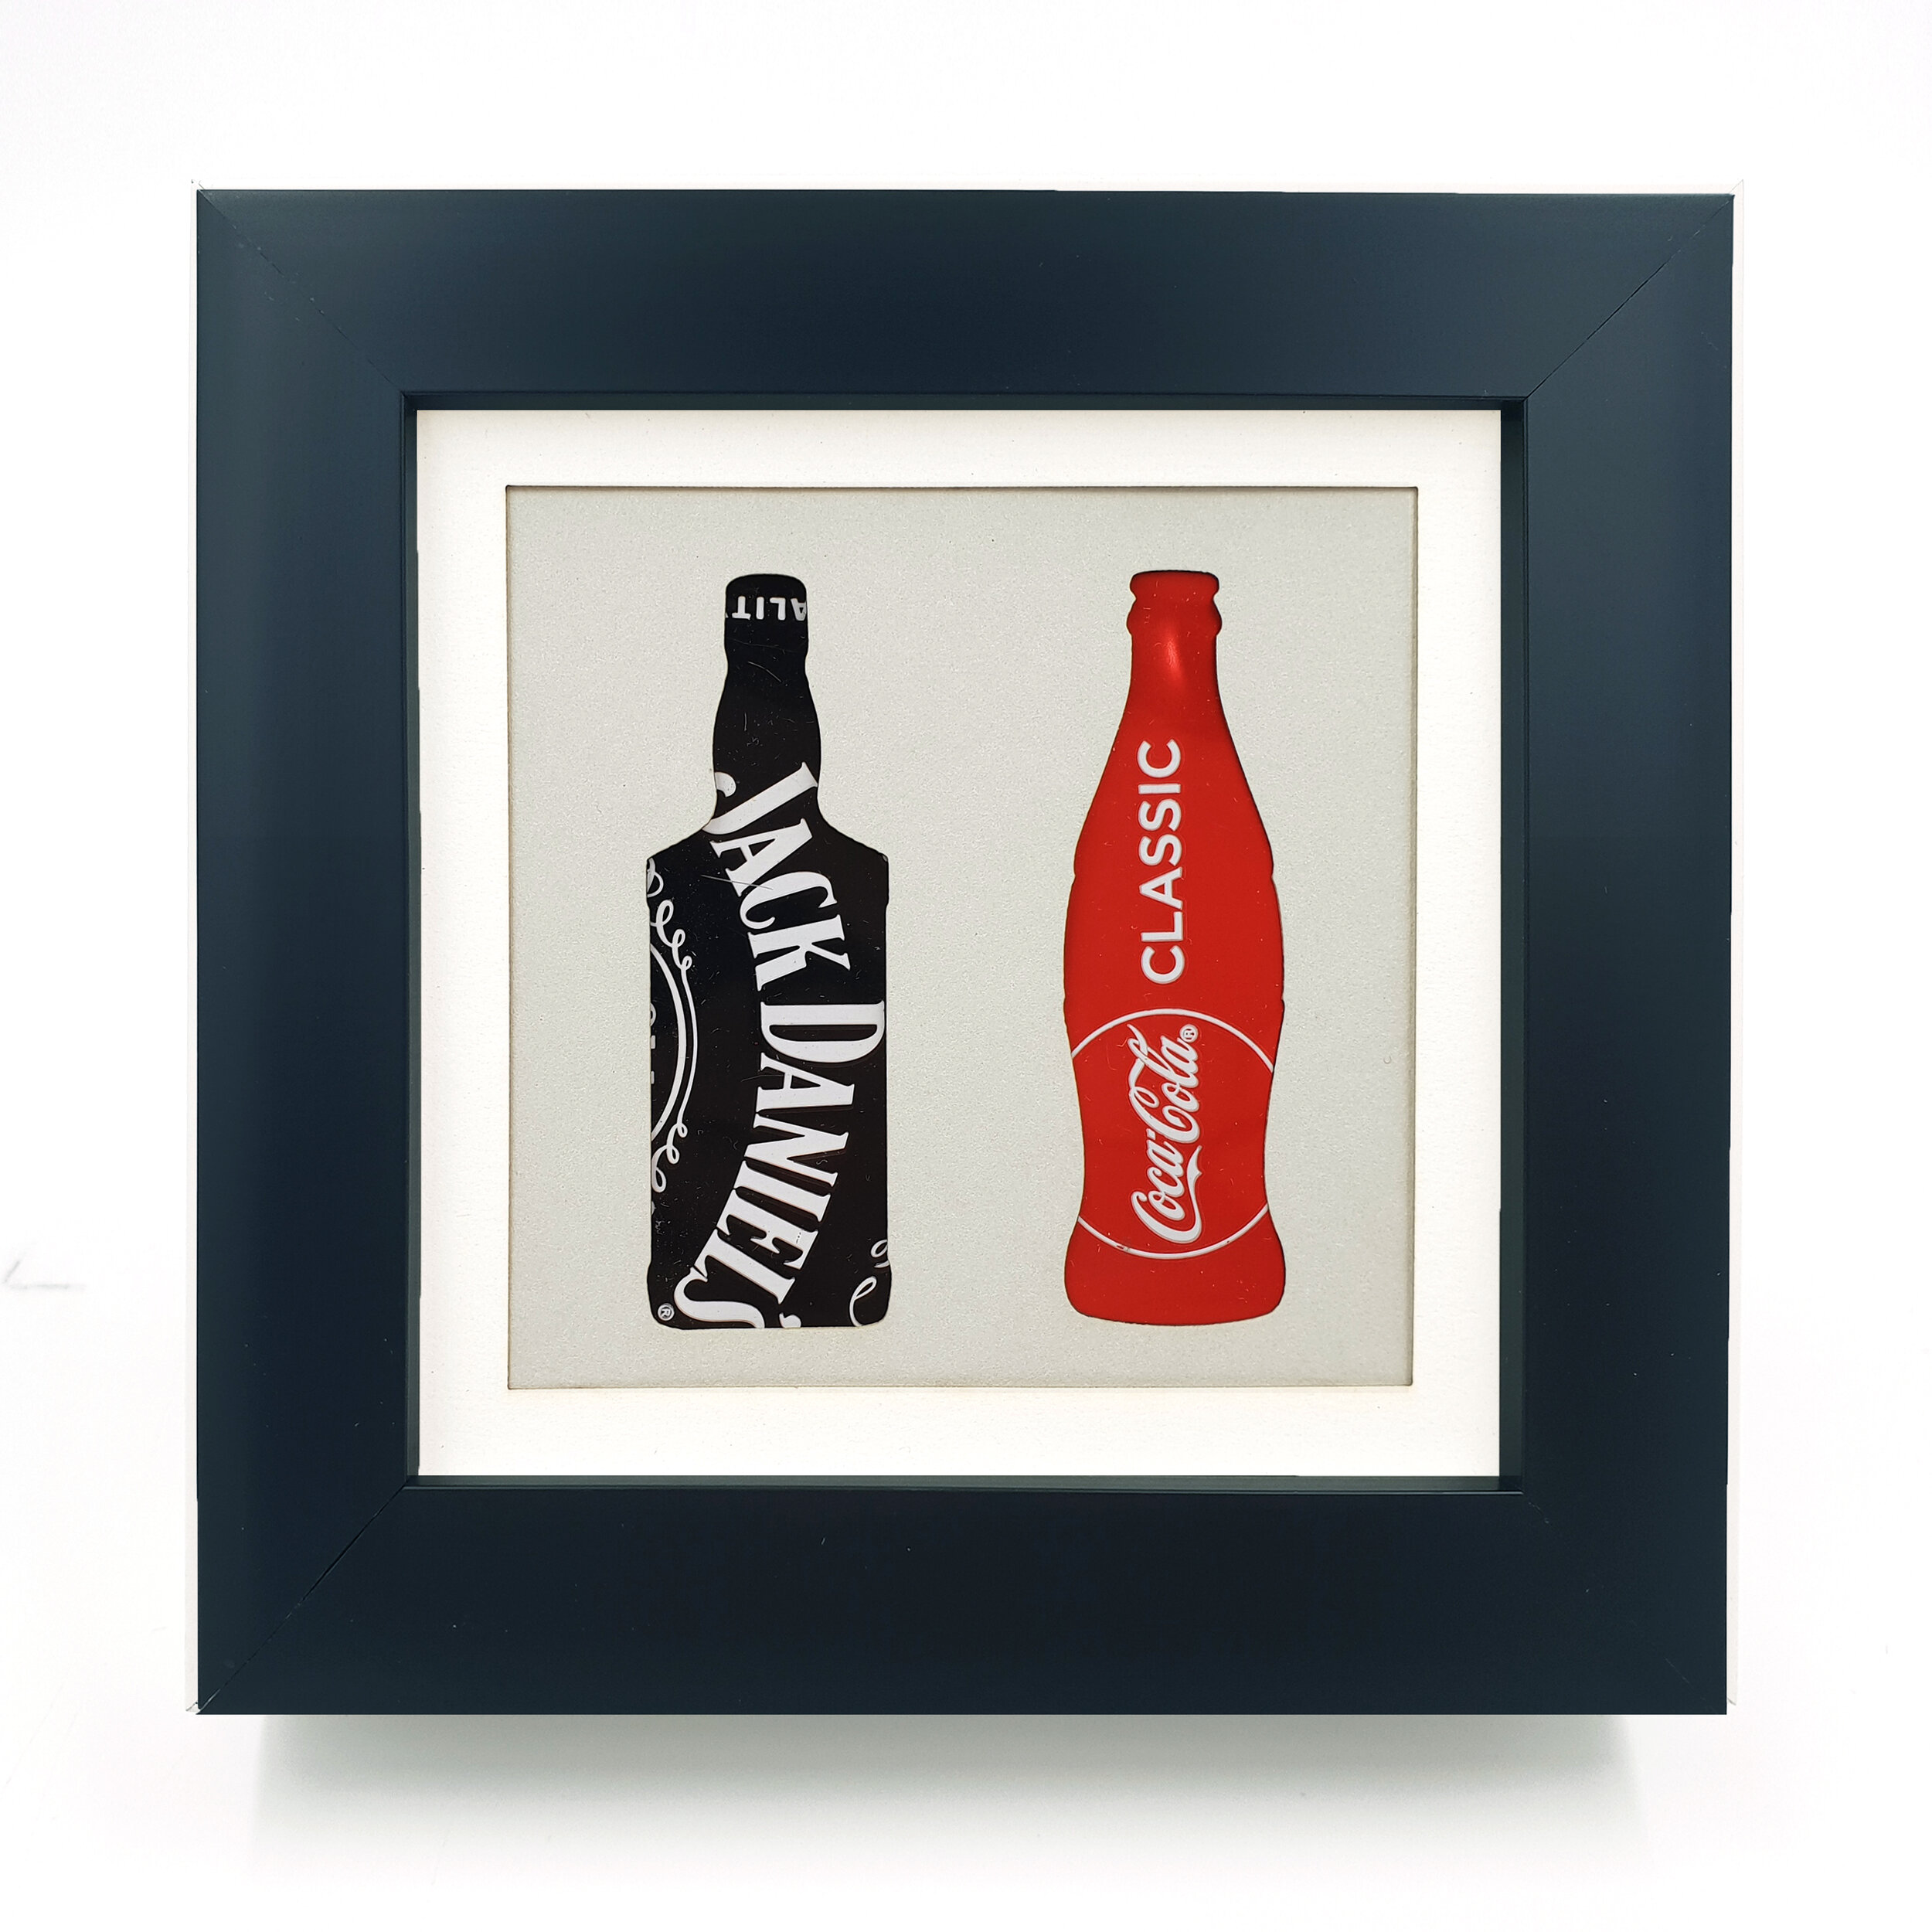 Jack Daniels and Coca-Cola red and black contemporary eco art black frame